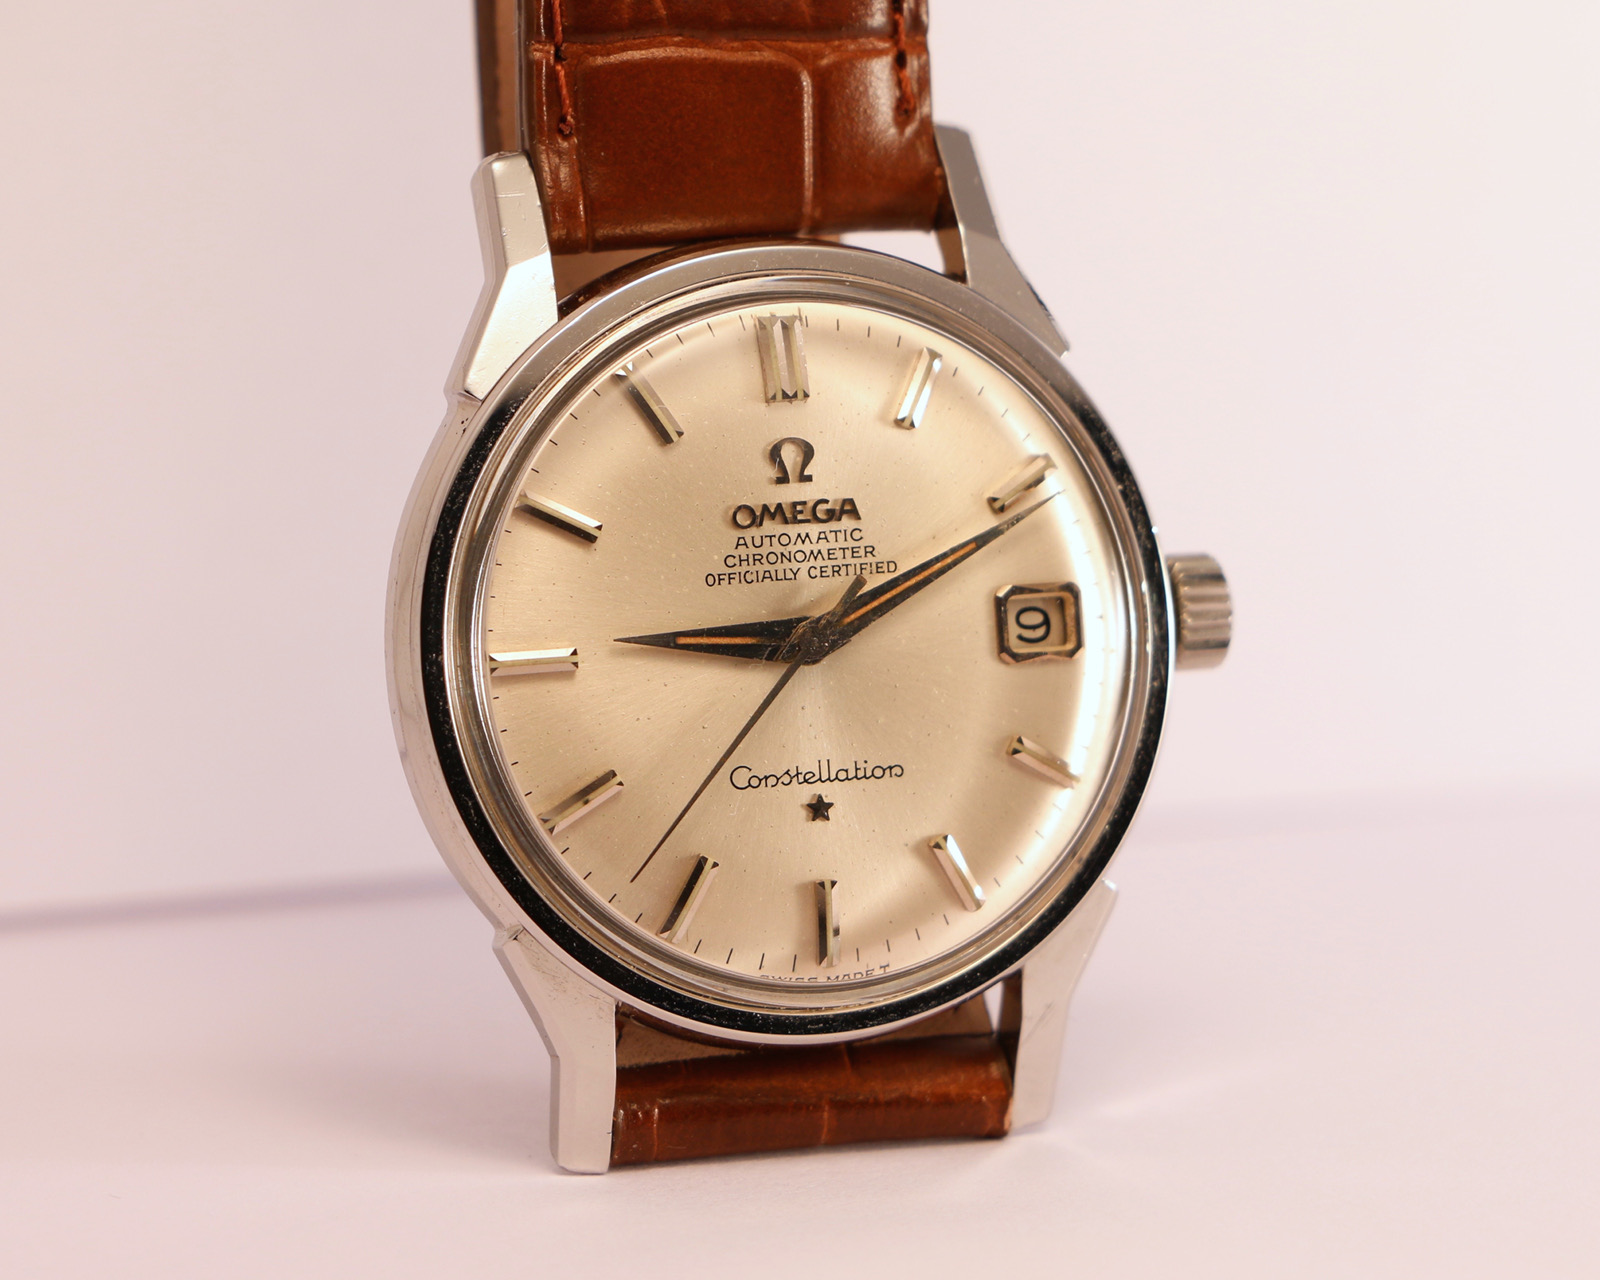 Omega Constellation “flat dial 